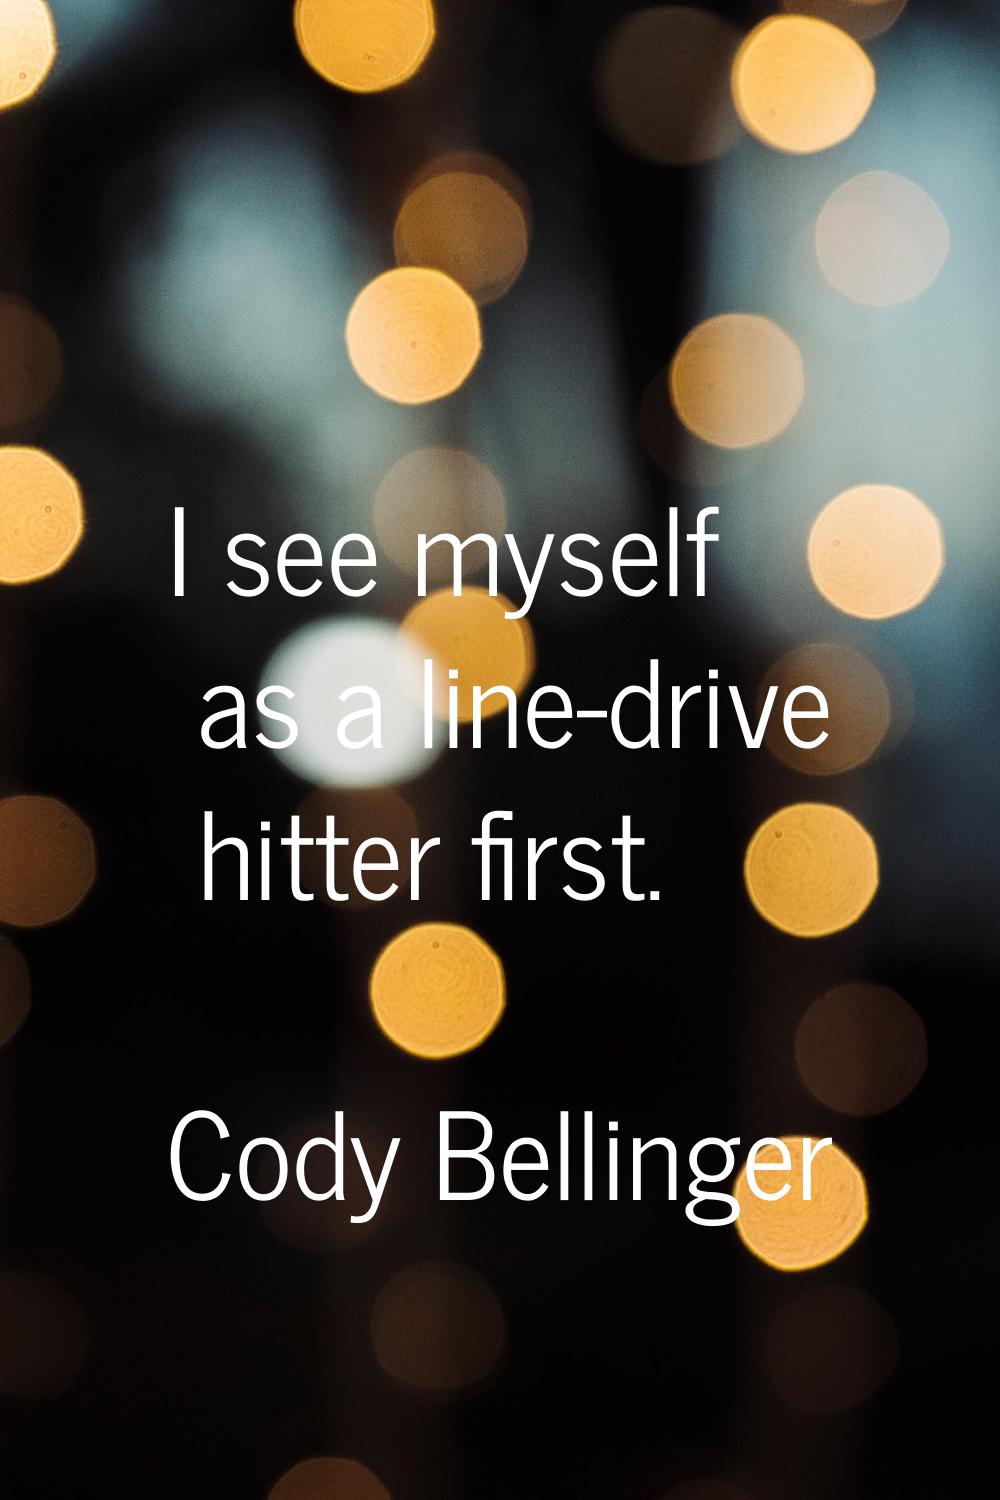 I see myself as a line-drive hitter first.